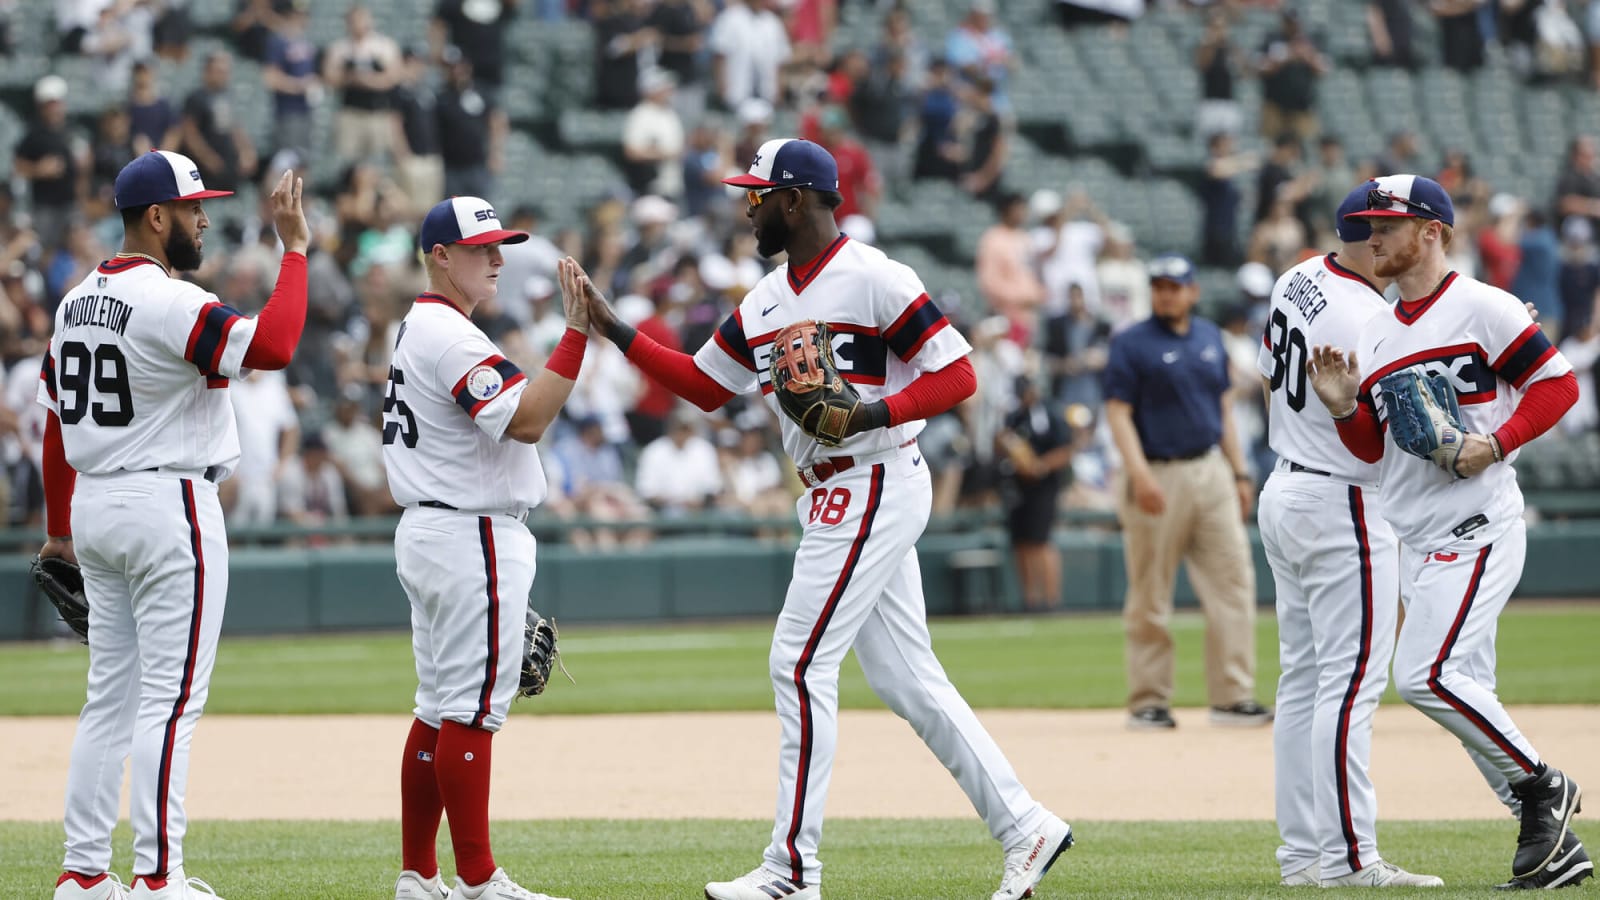 BSJ Game Report: White Sox 4, Red Sox 1 - Uninspired Sox offense muster one run, Luis Robert Jr. homers twice, fall to 3-4 on road trip